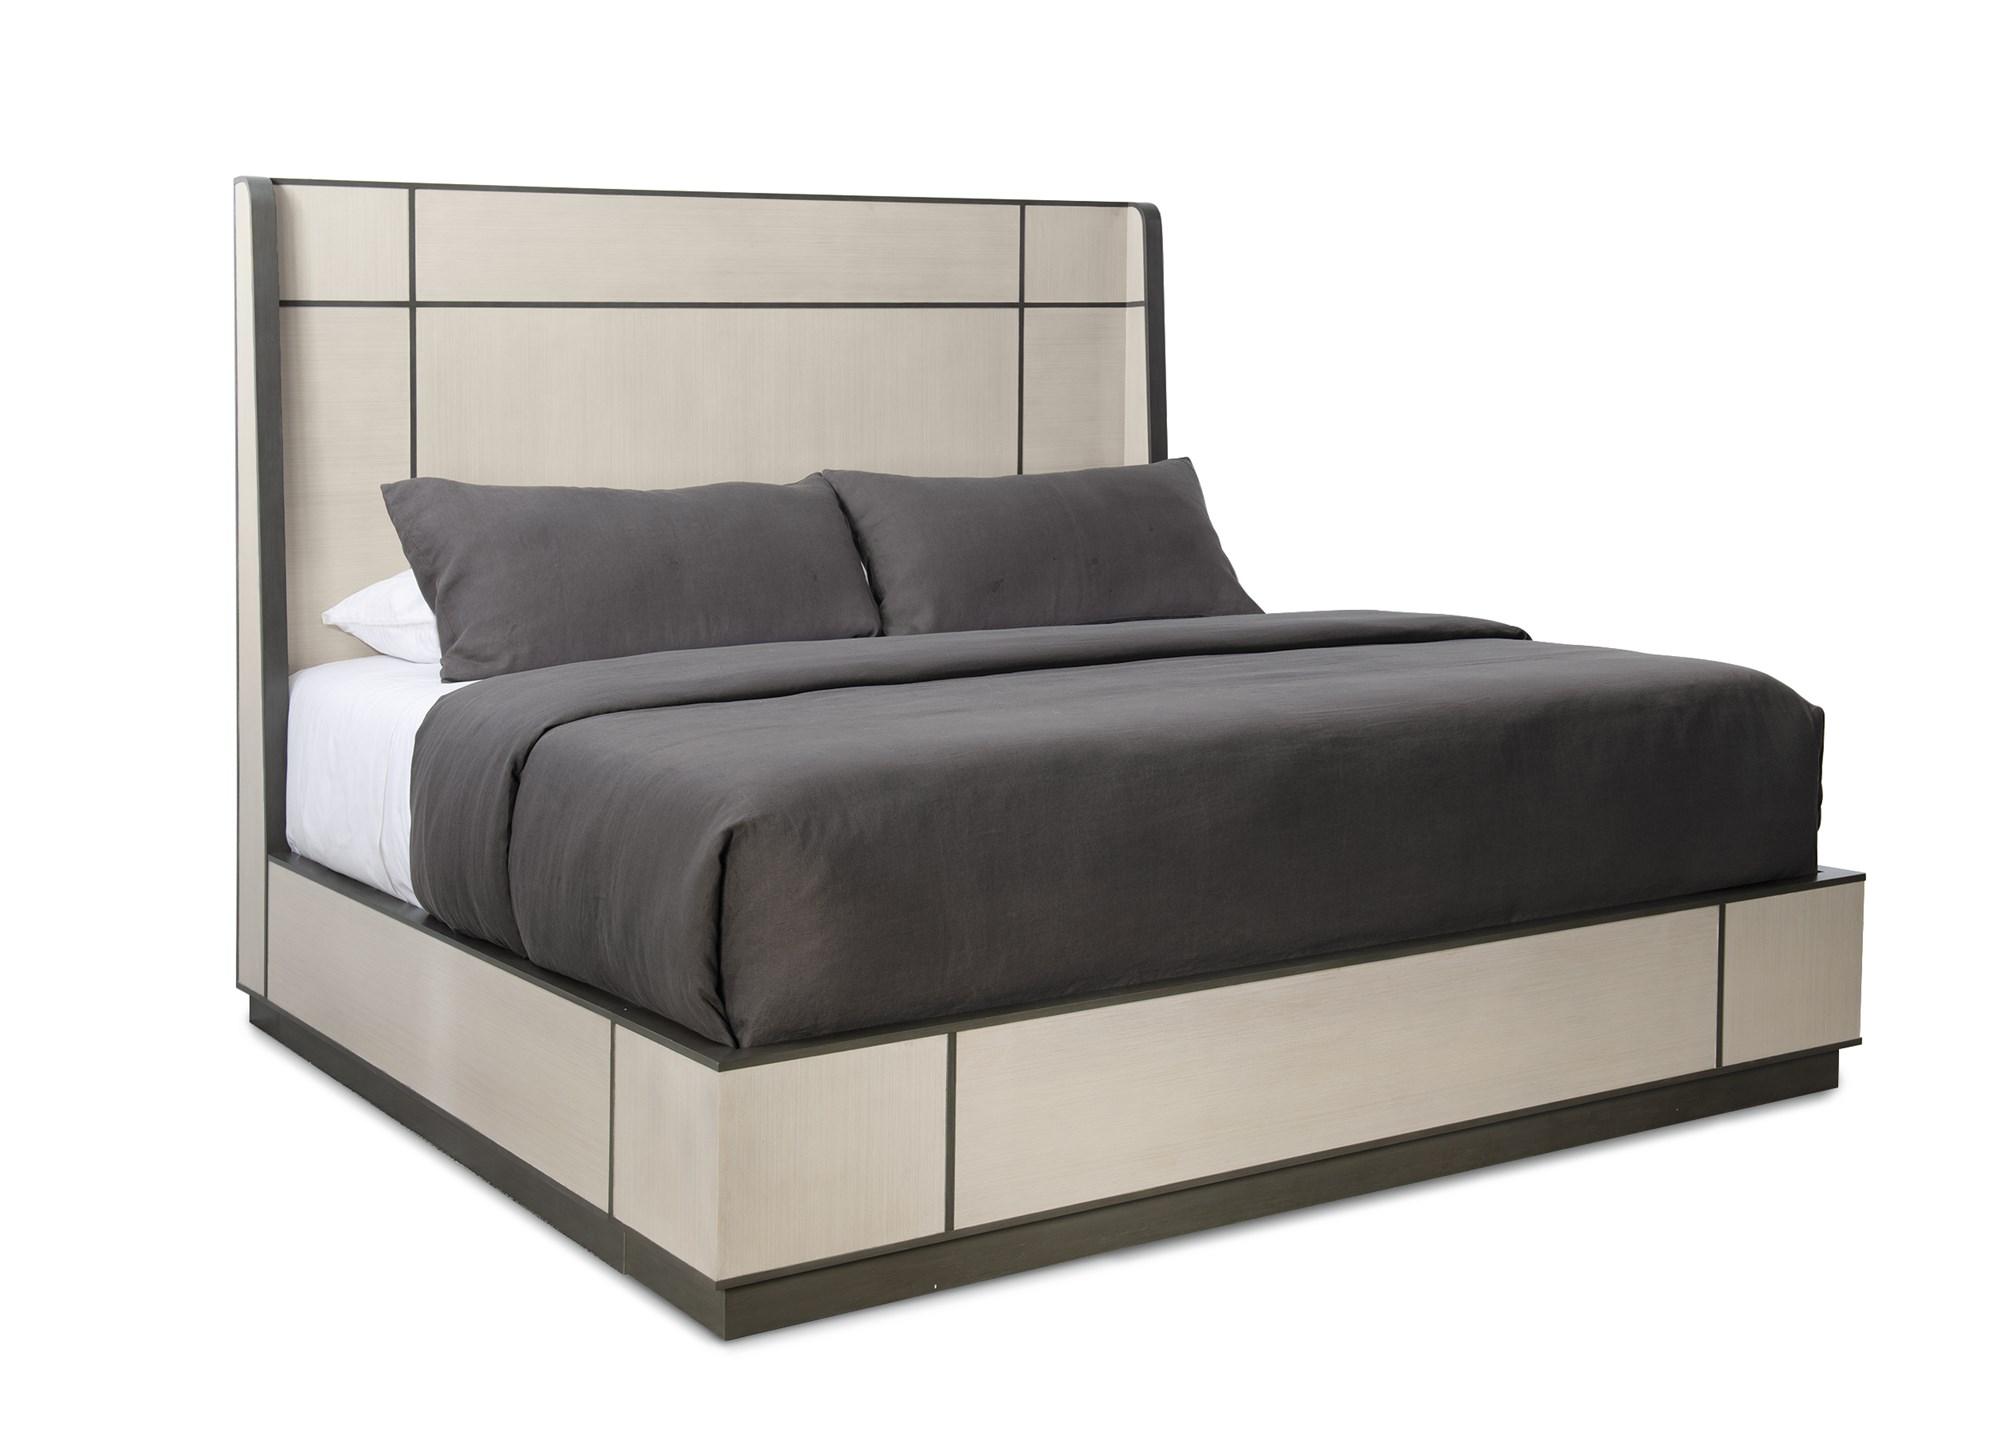 

    
Ashe Taupe Finish Zinc Oxide Inlay Queen REPETITION WOOD BED by Caracole
